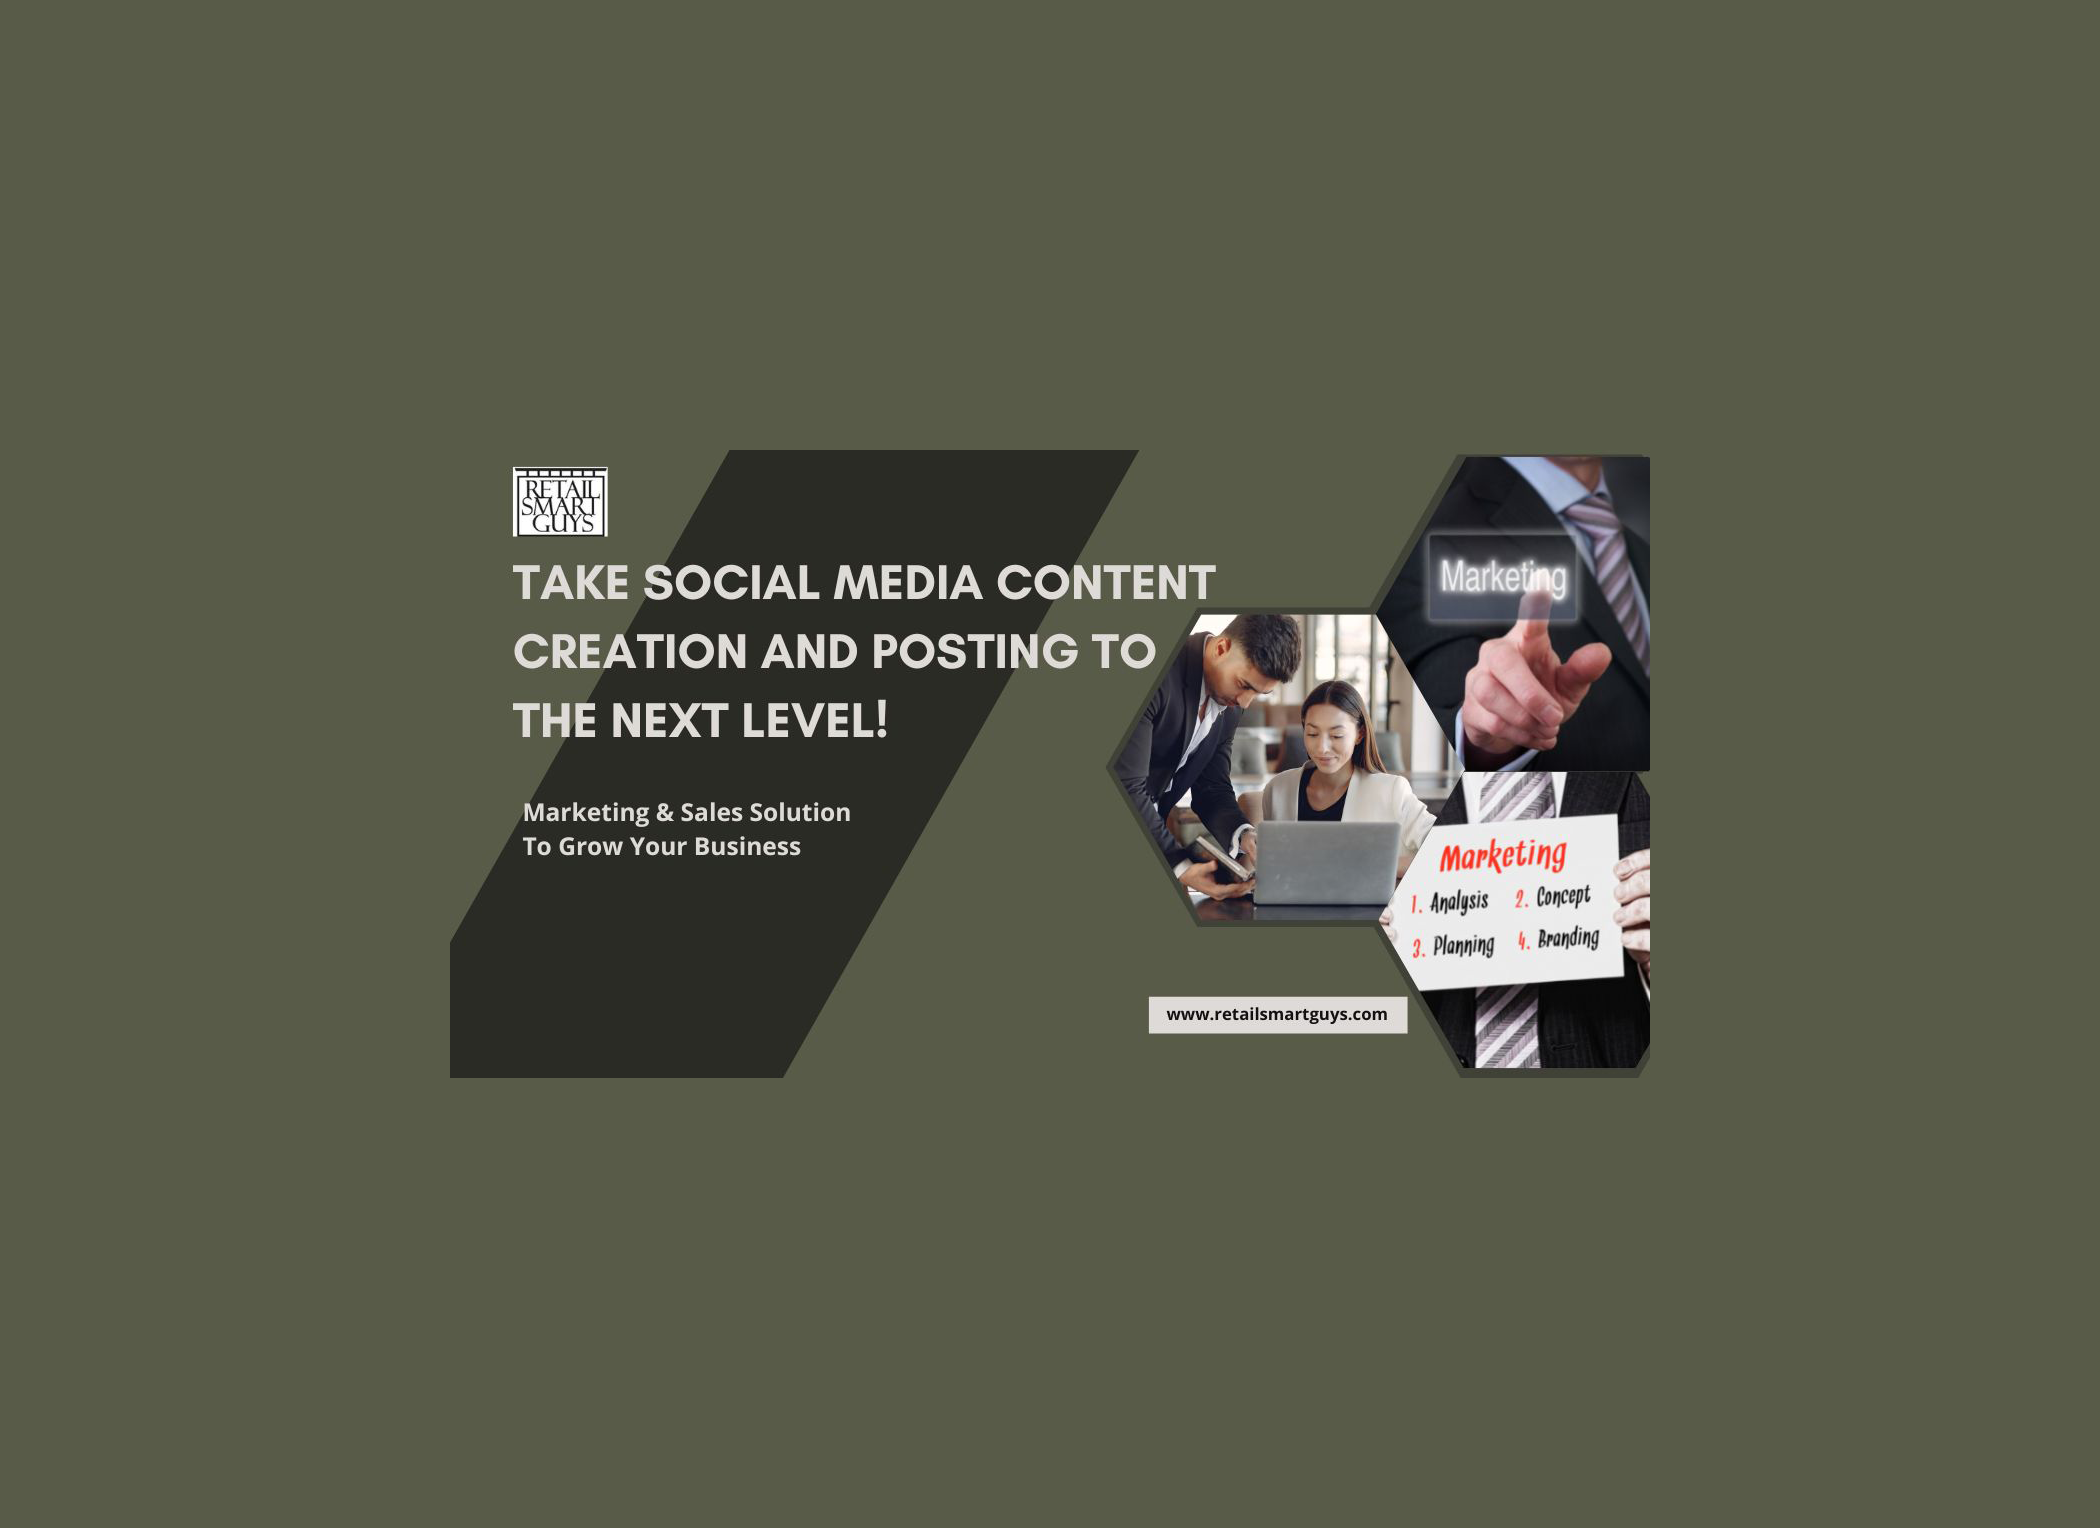 Take Social Media Content Creation and Posting to the Next Level!